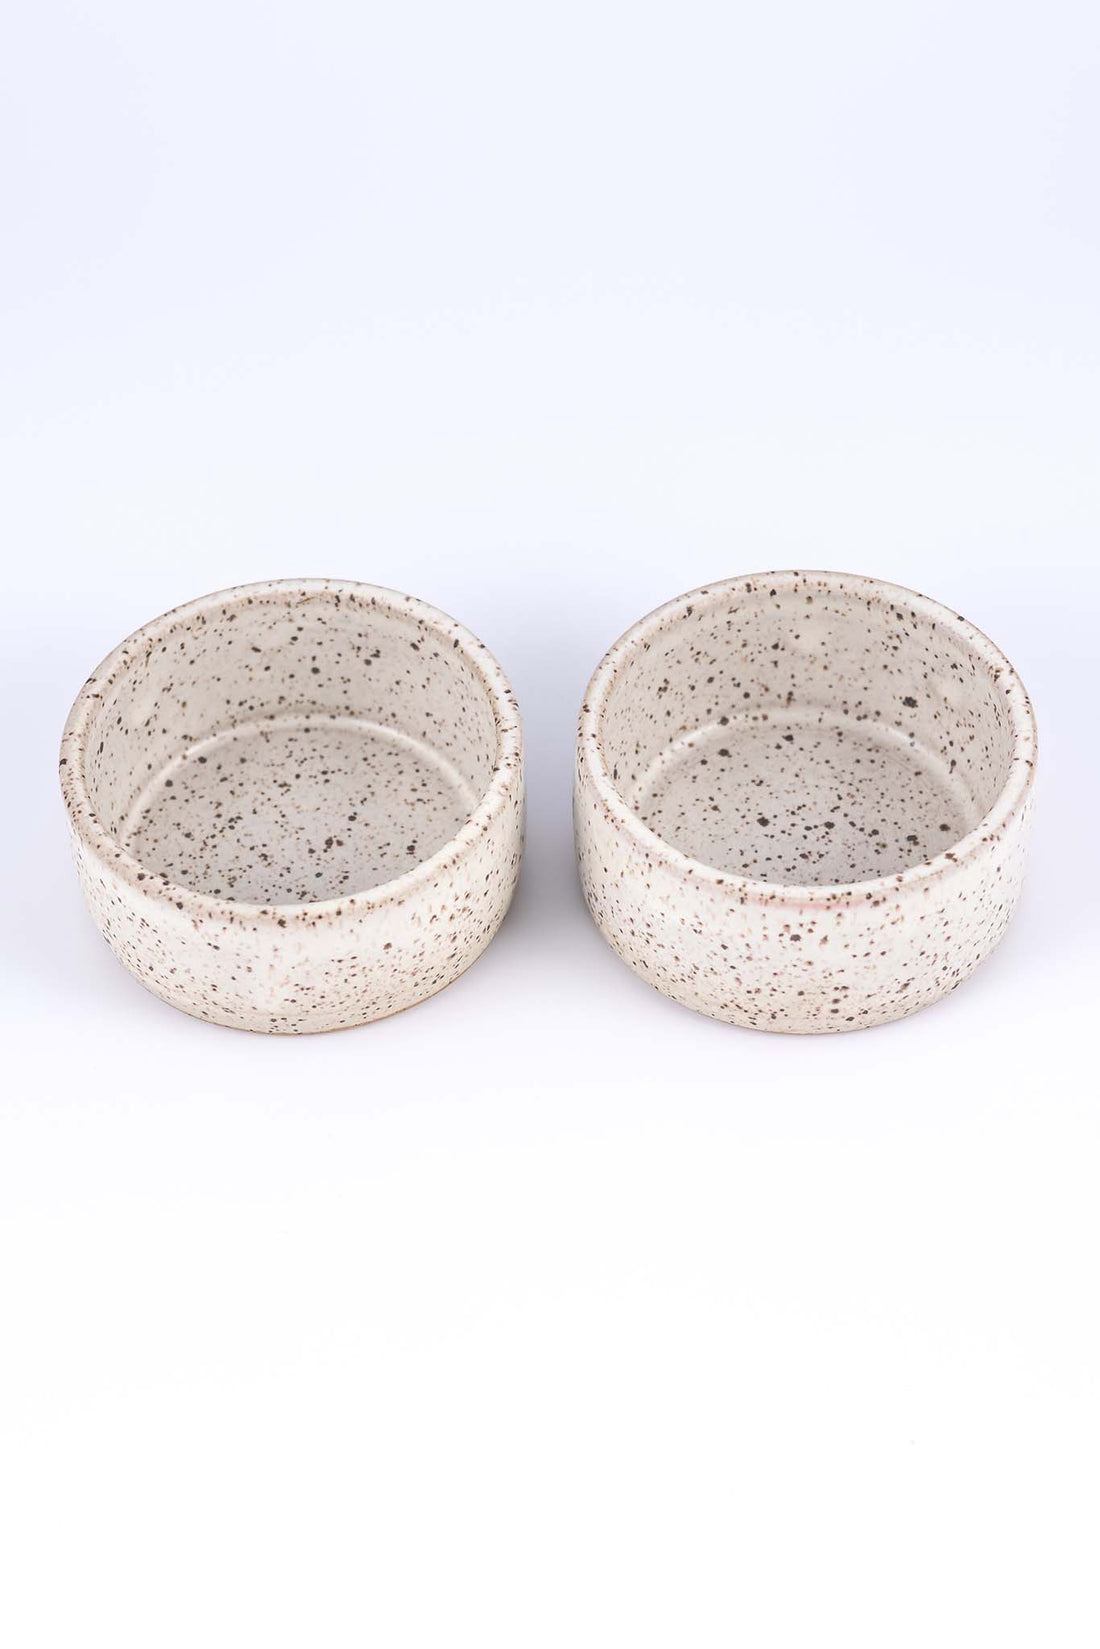 Set of white speckled clay mezcal copitas